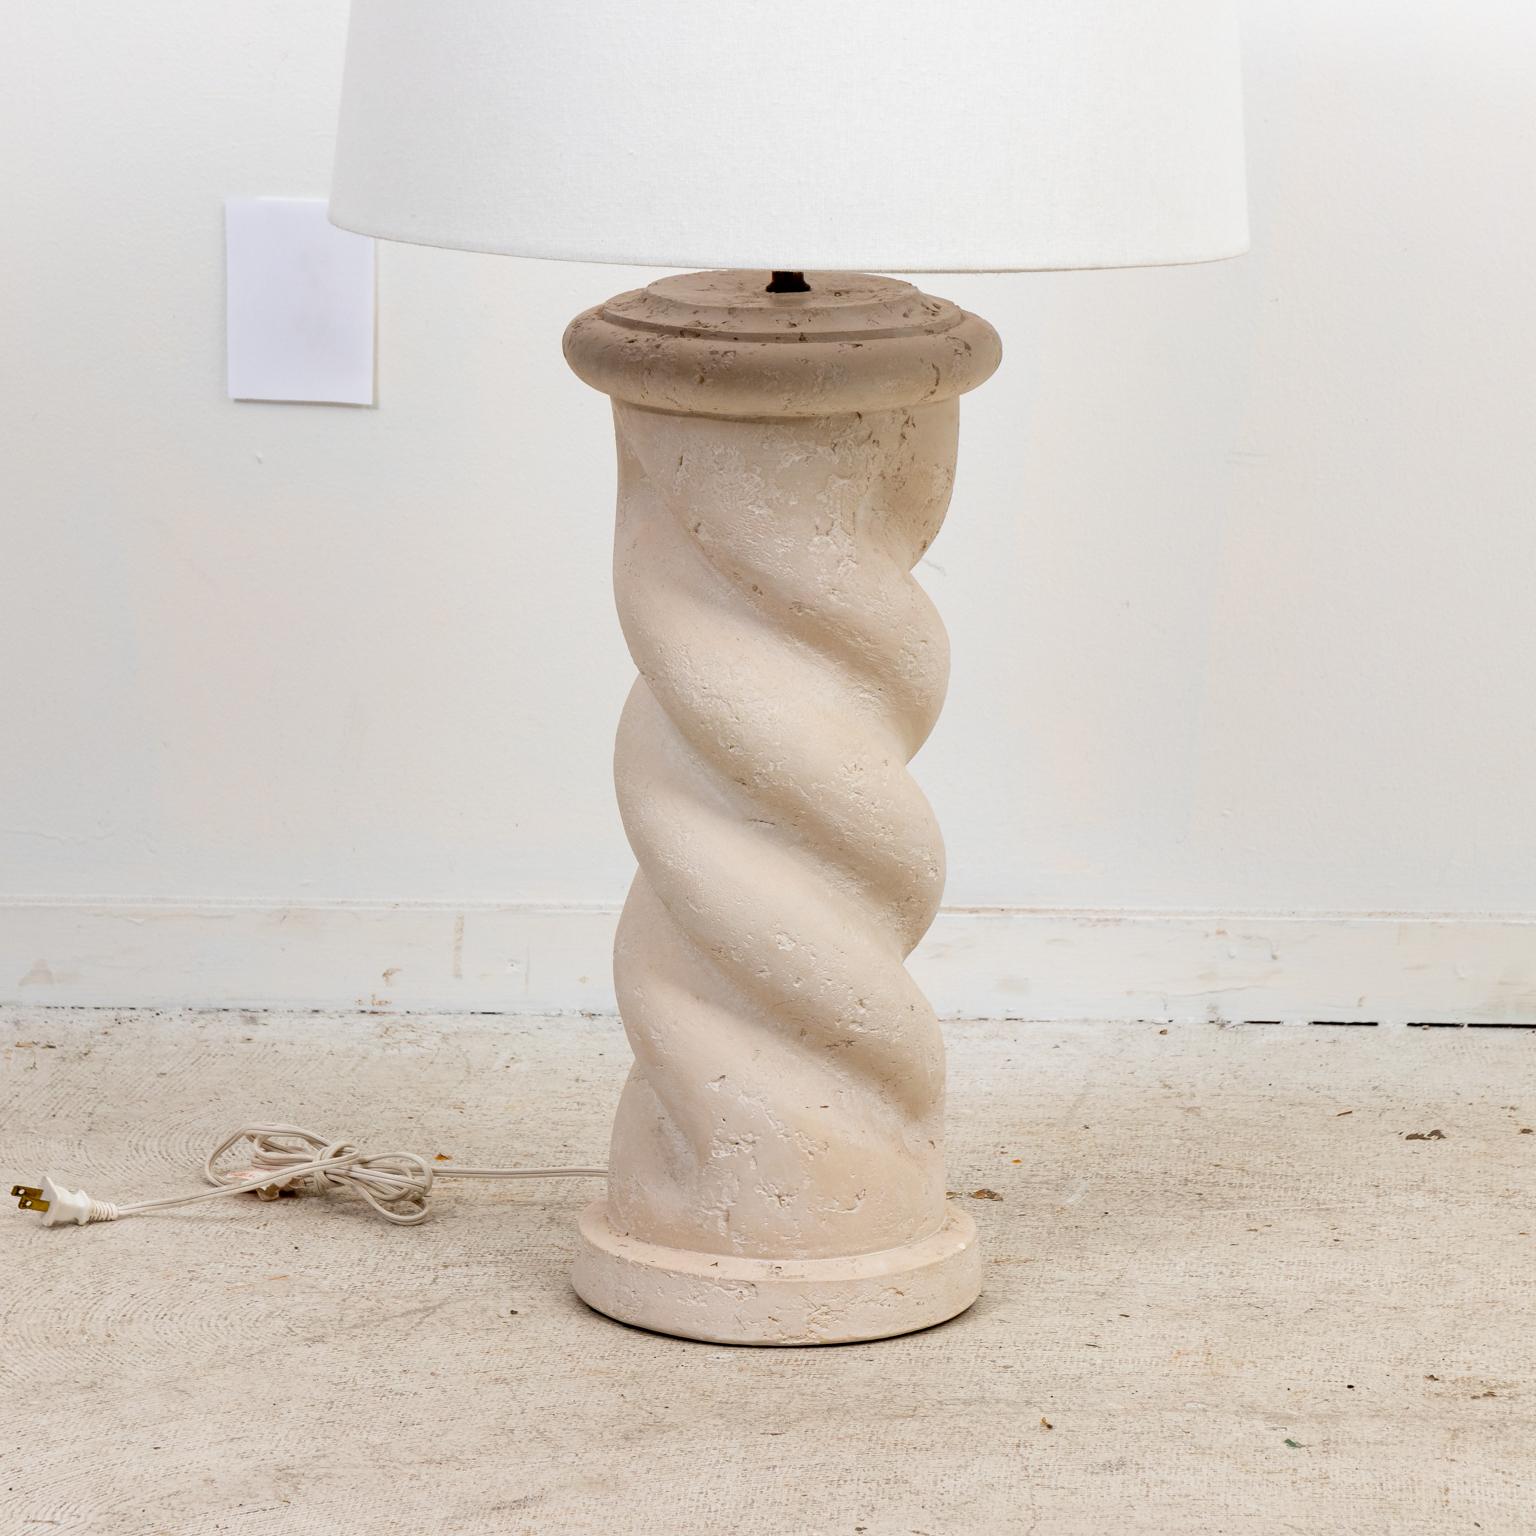 Circa mid-20th century vintage plaster spiral column table lamp in the style of Michael Taylor. The casting show intentionally distressed appearance and aged patina. Good vintage condition, small areas of tarnish and oxidation on brass base. Shades